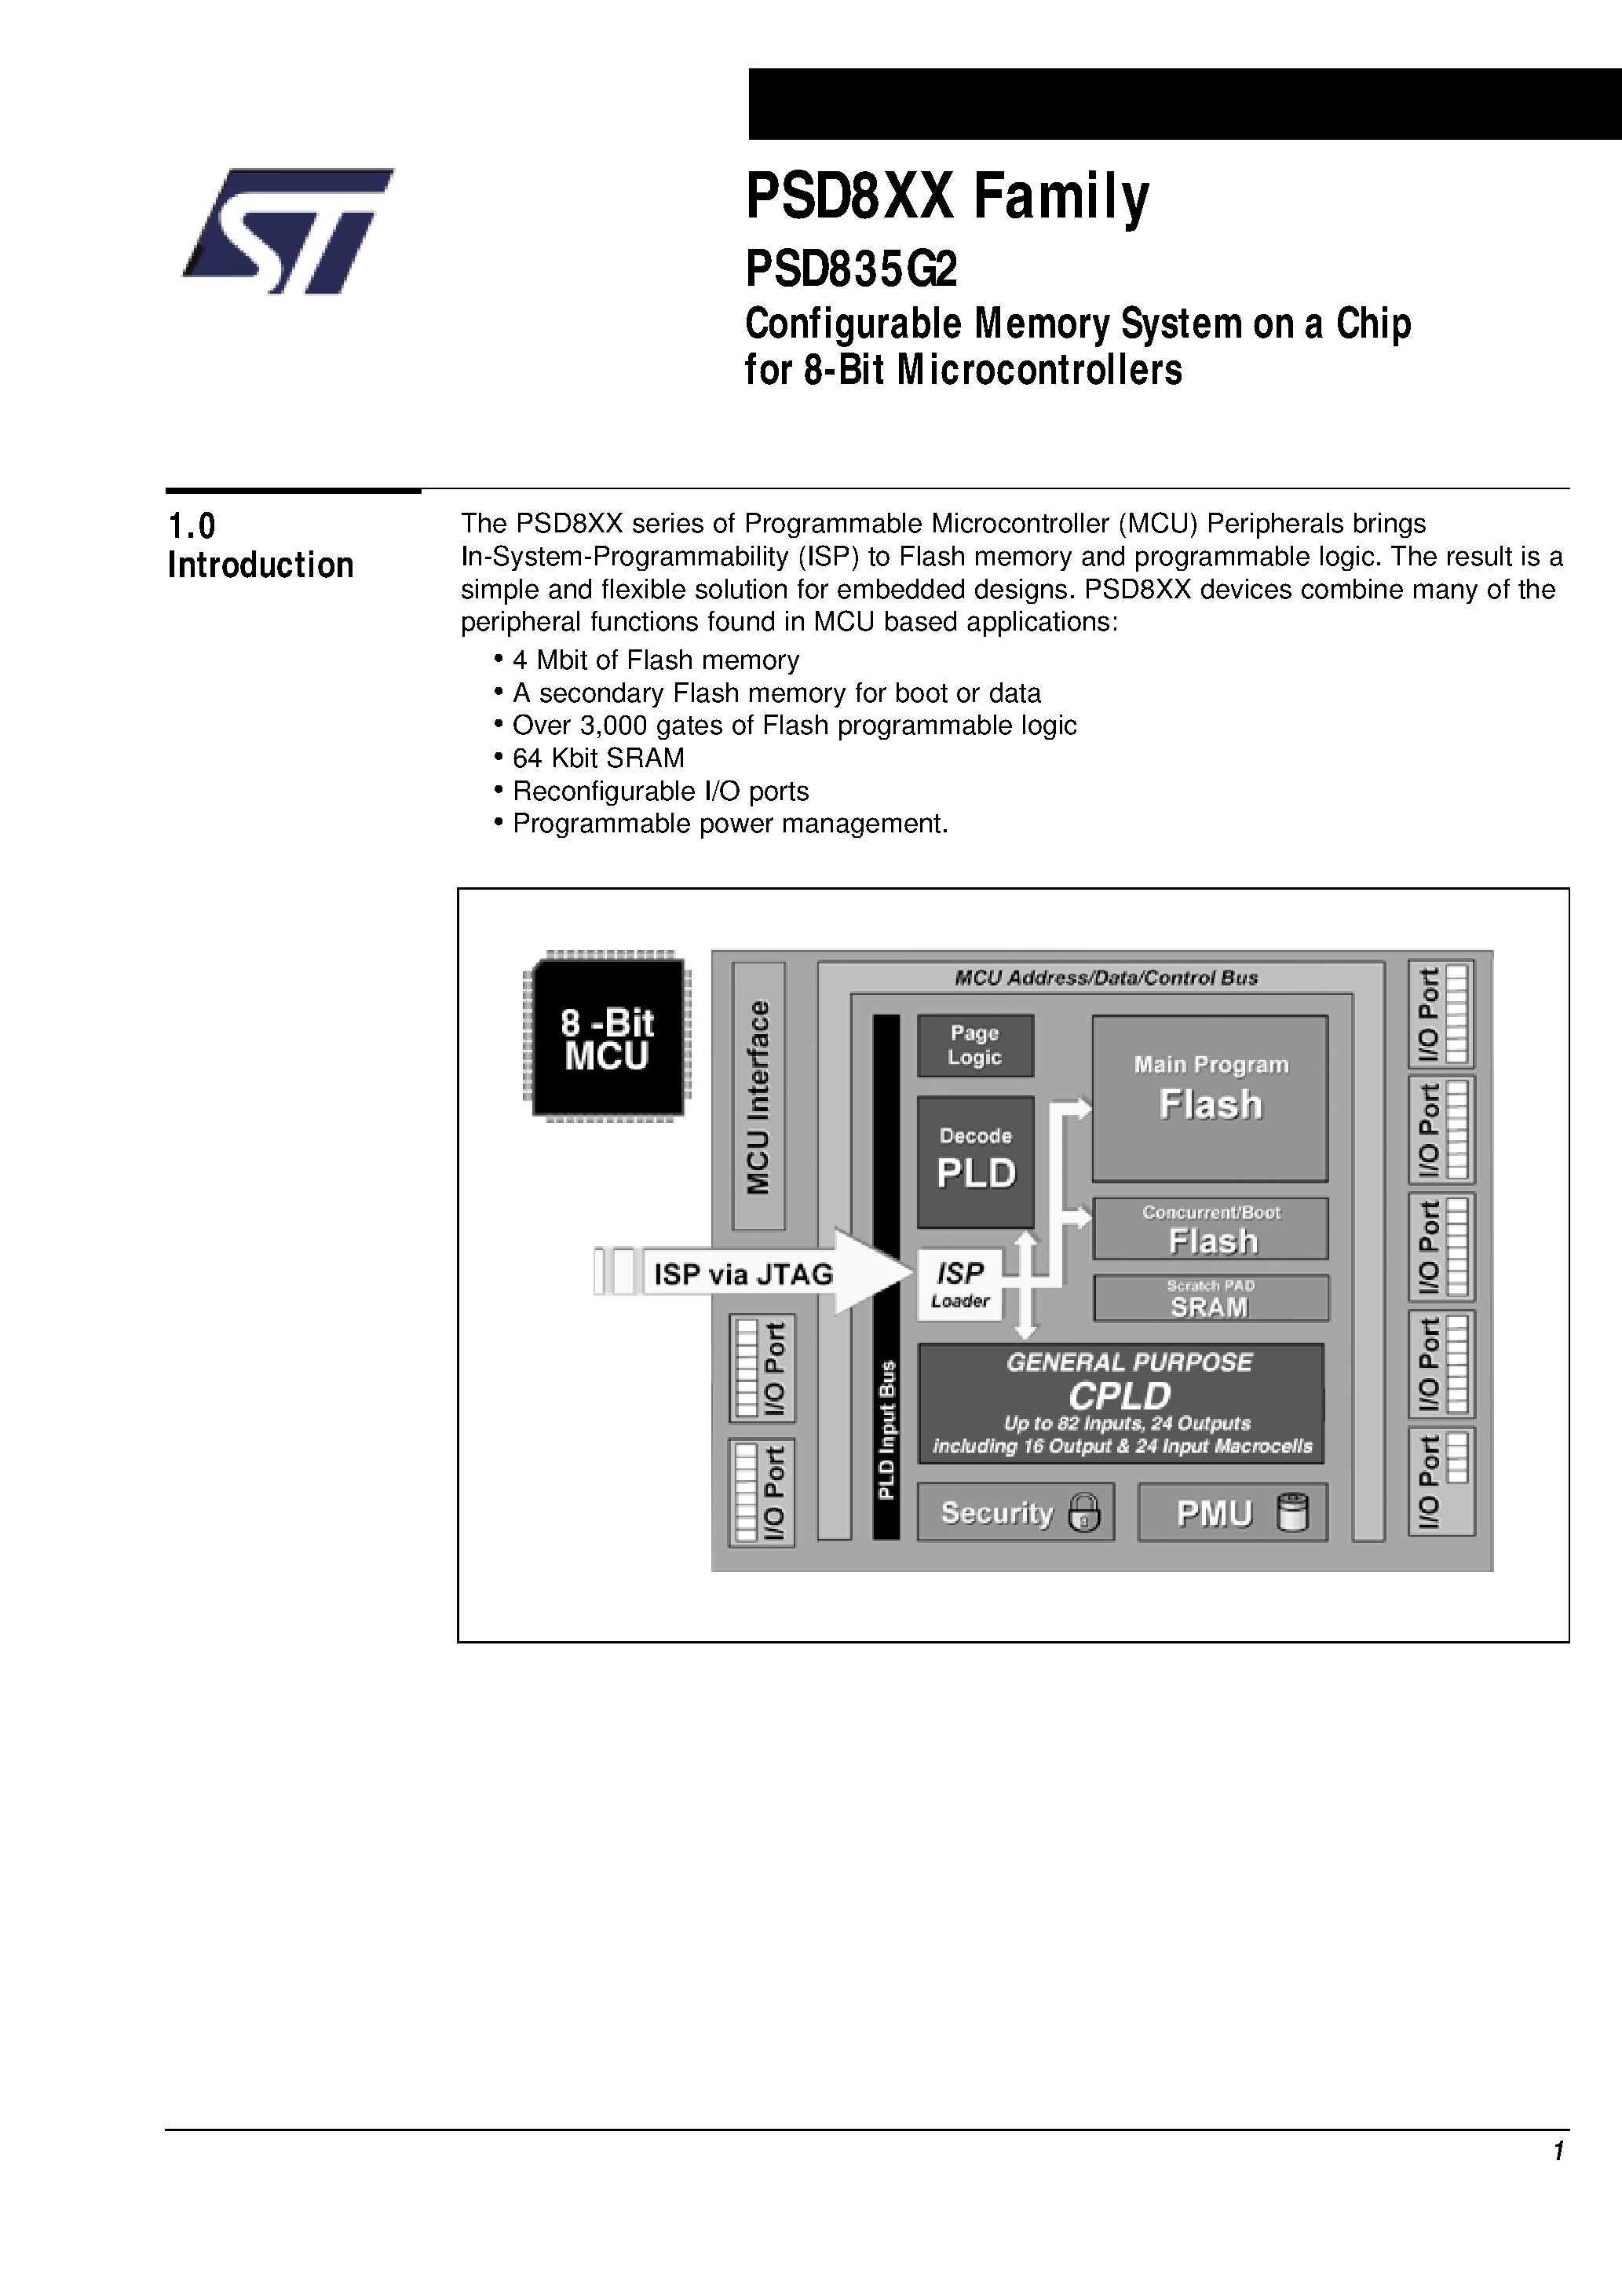 Datasheet PSD835F1-A-90MI - Configurable Memory System on a Chip for 8-Bit Microcontrollers page 2